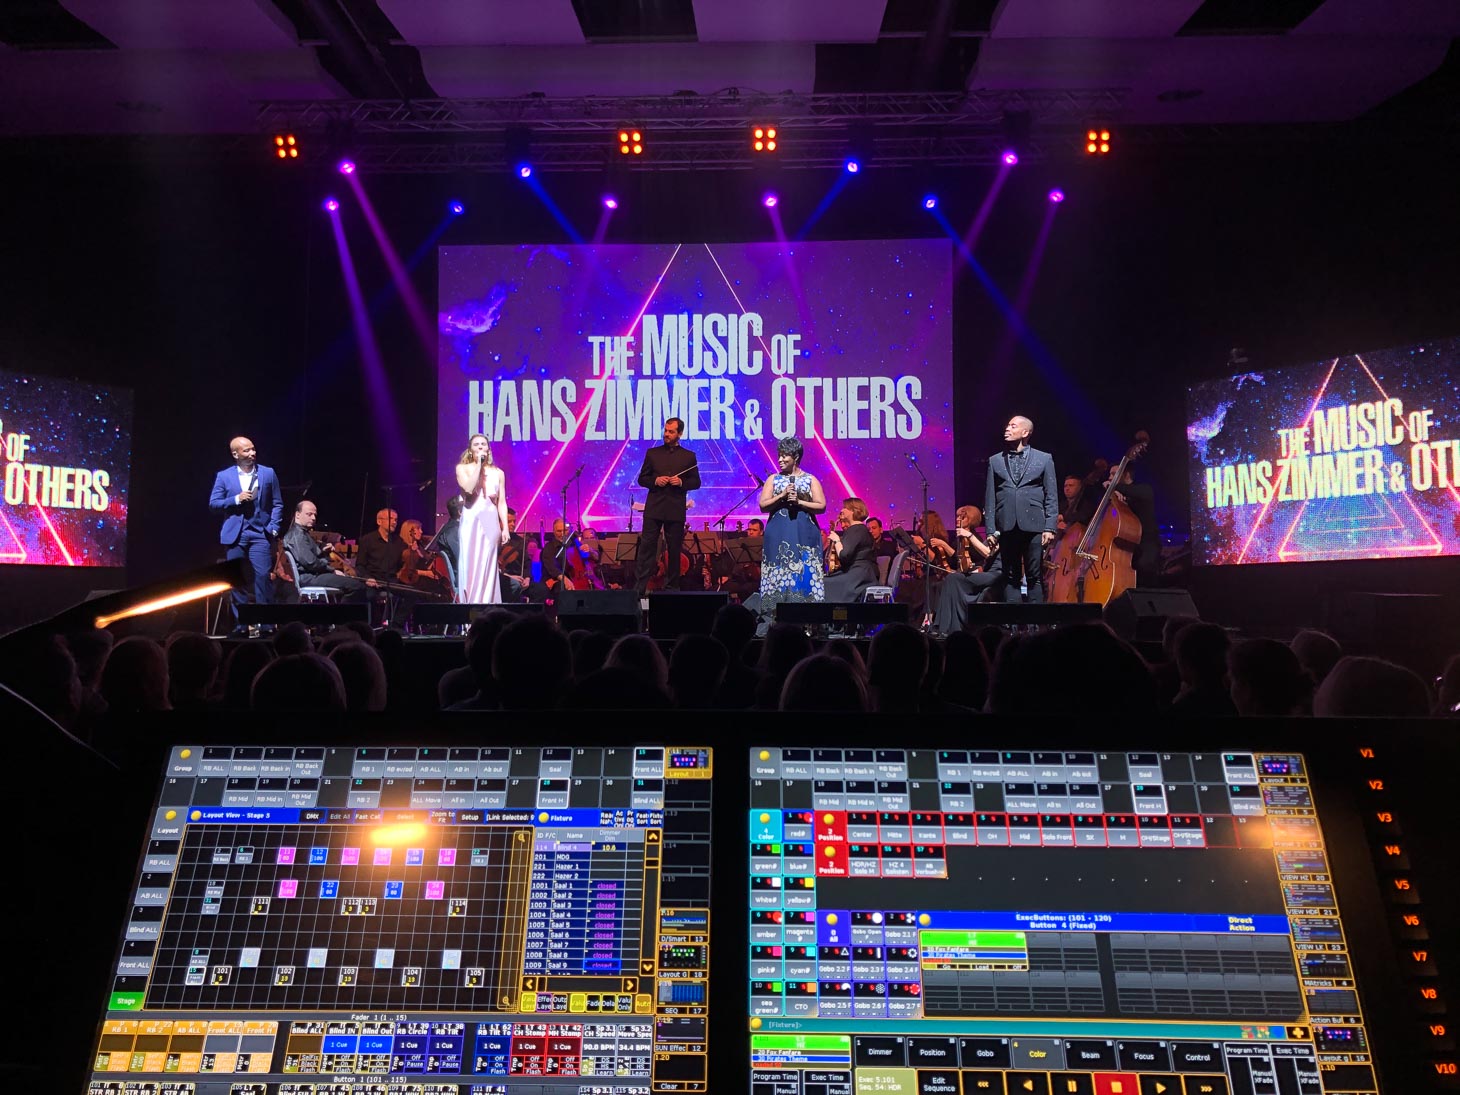 Tour Support Music of Hans Zimmer